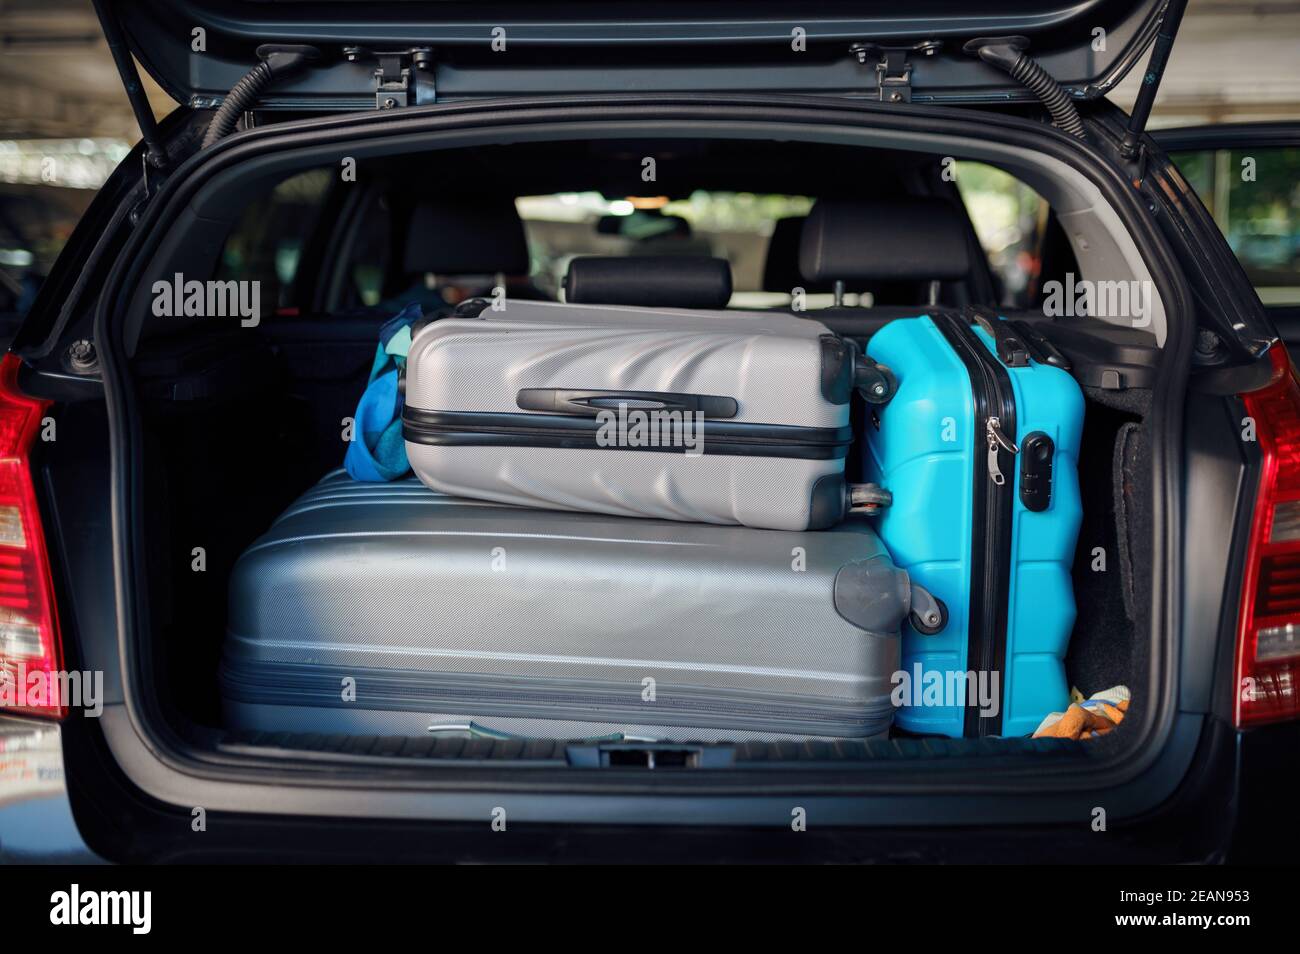 Suitcases in opened car trunk on parking, nobody Stock Photo